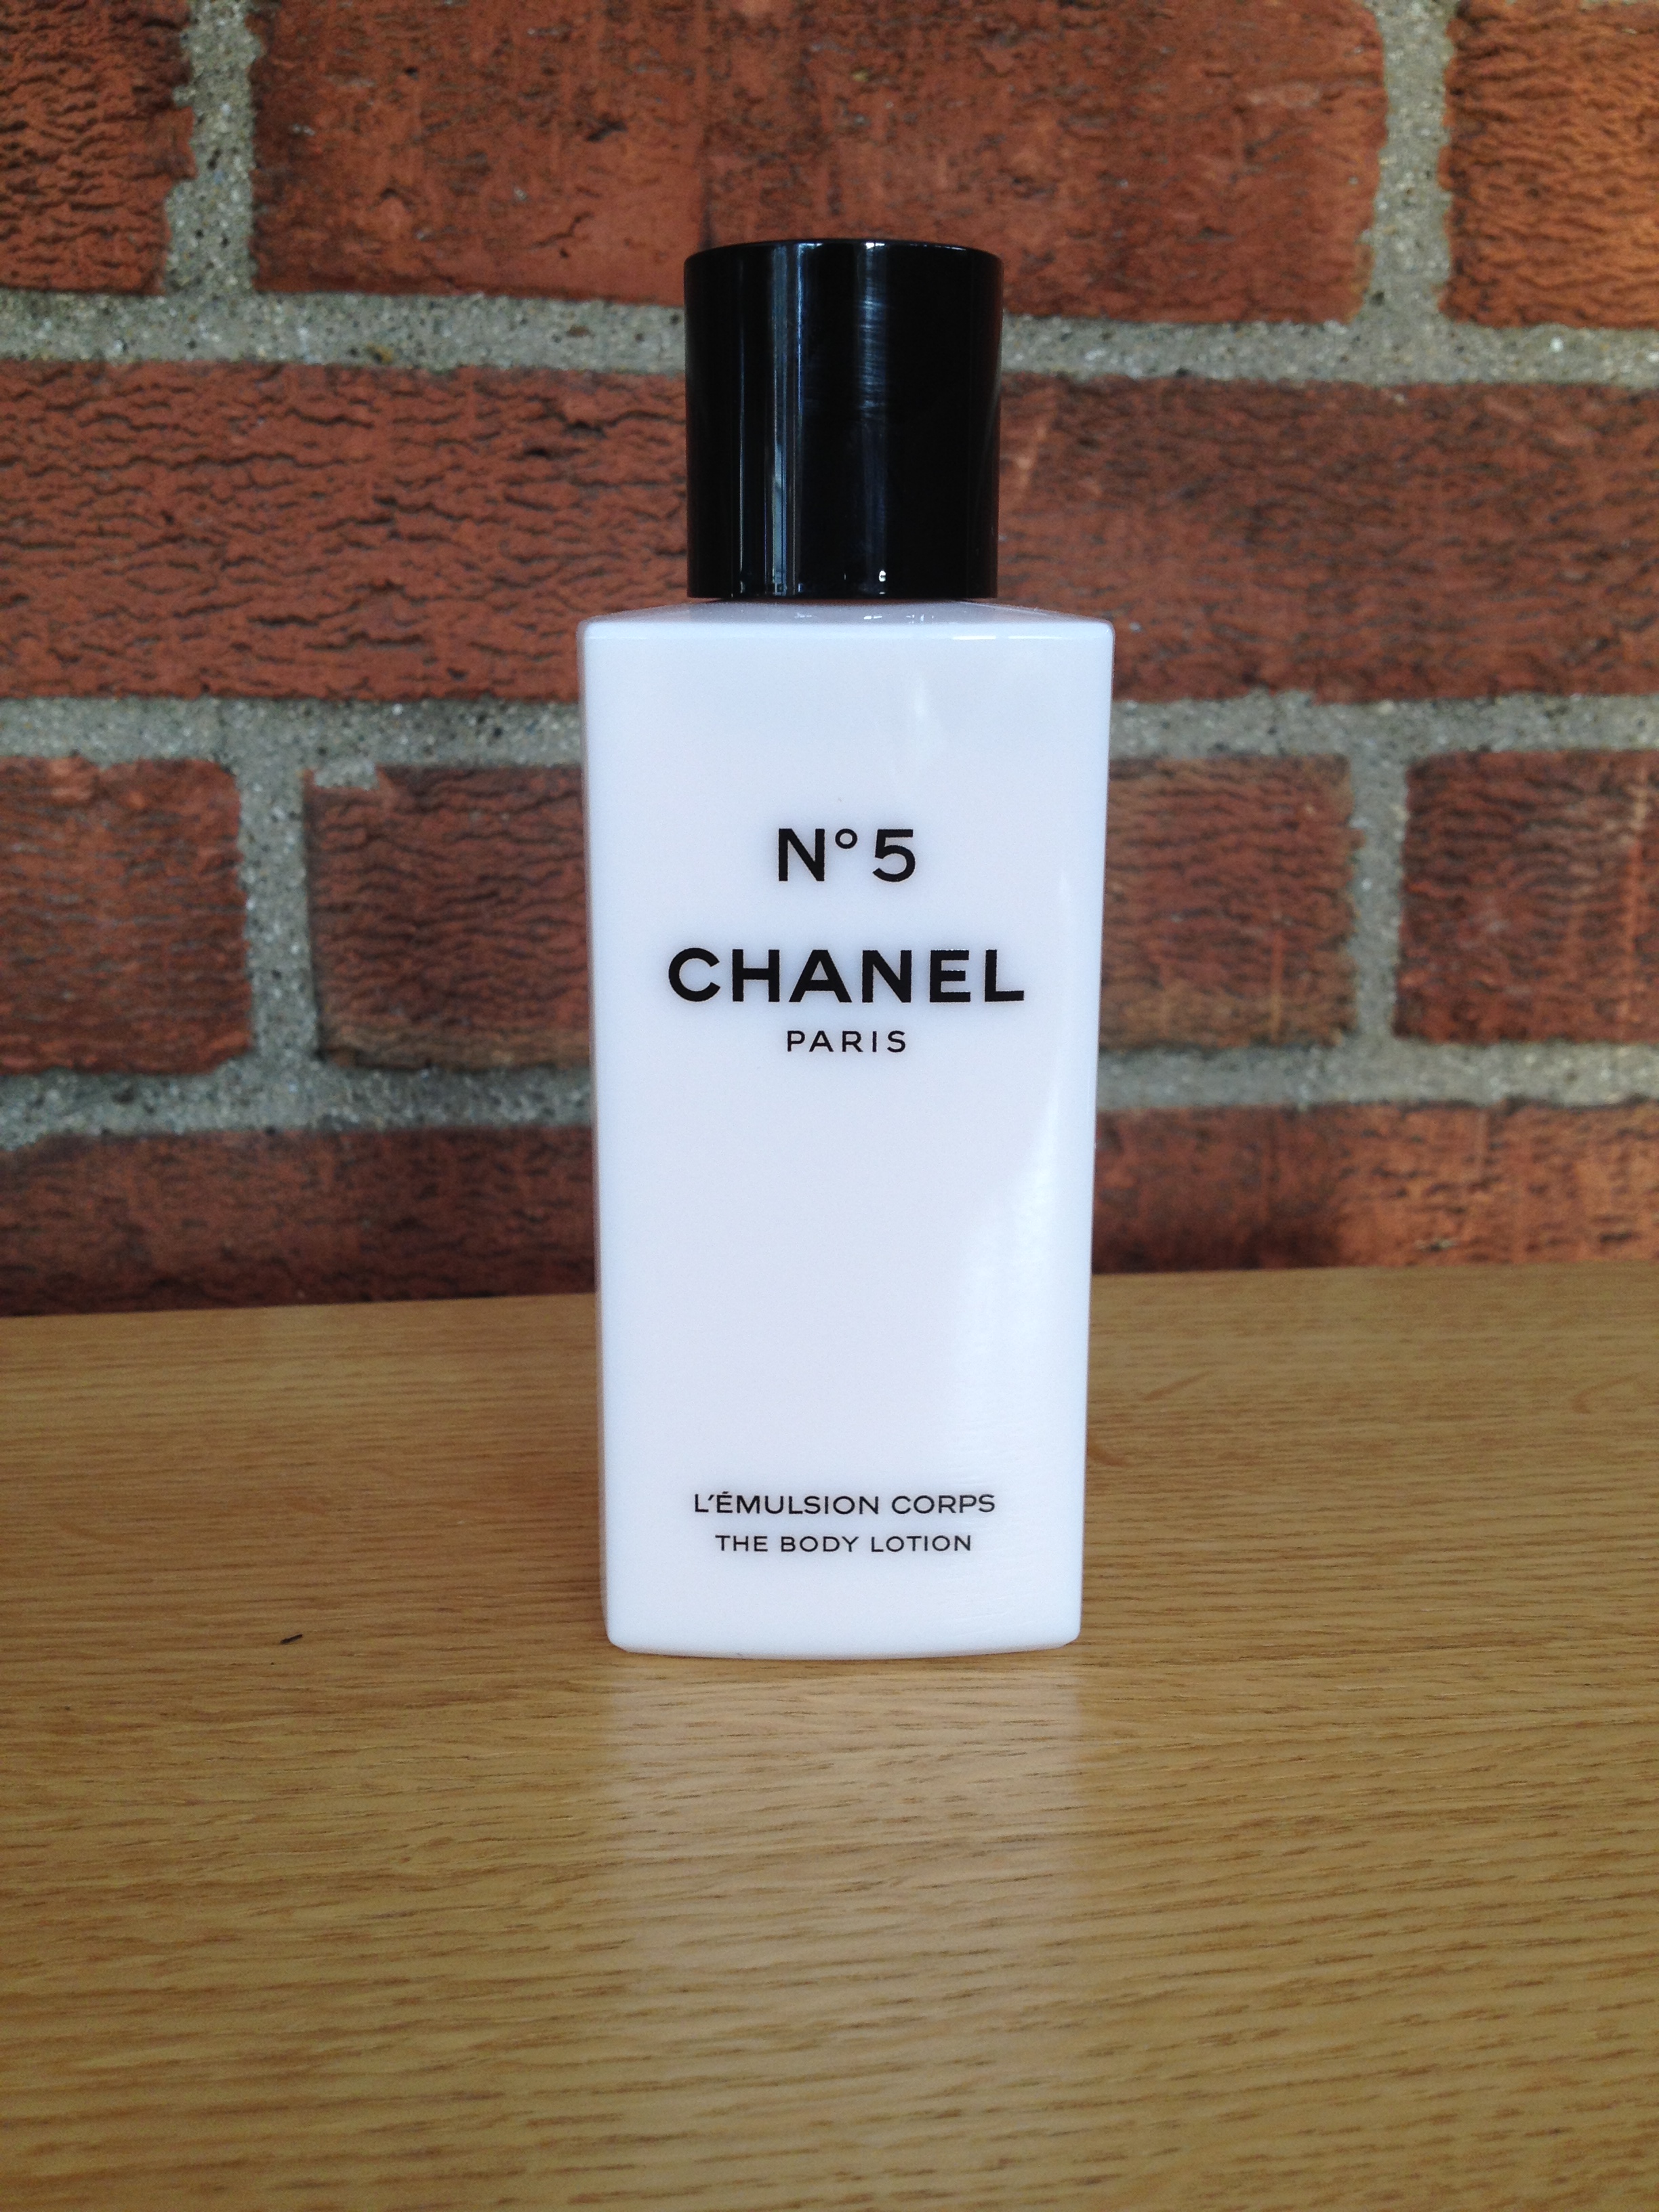 Chanel N5 body lotion for women  notinocouk